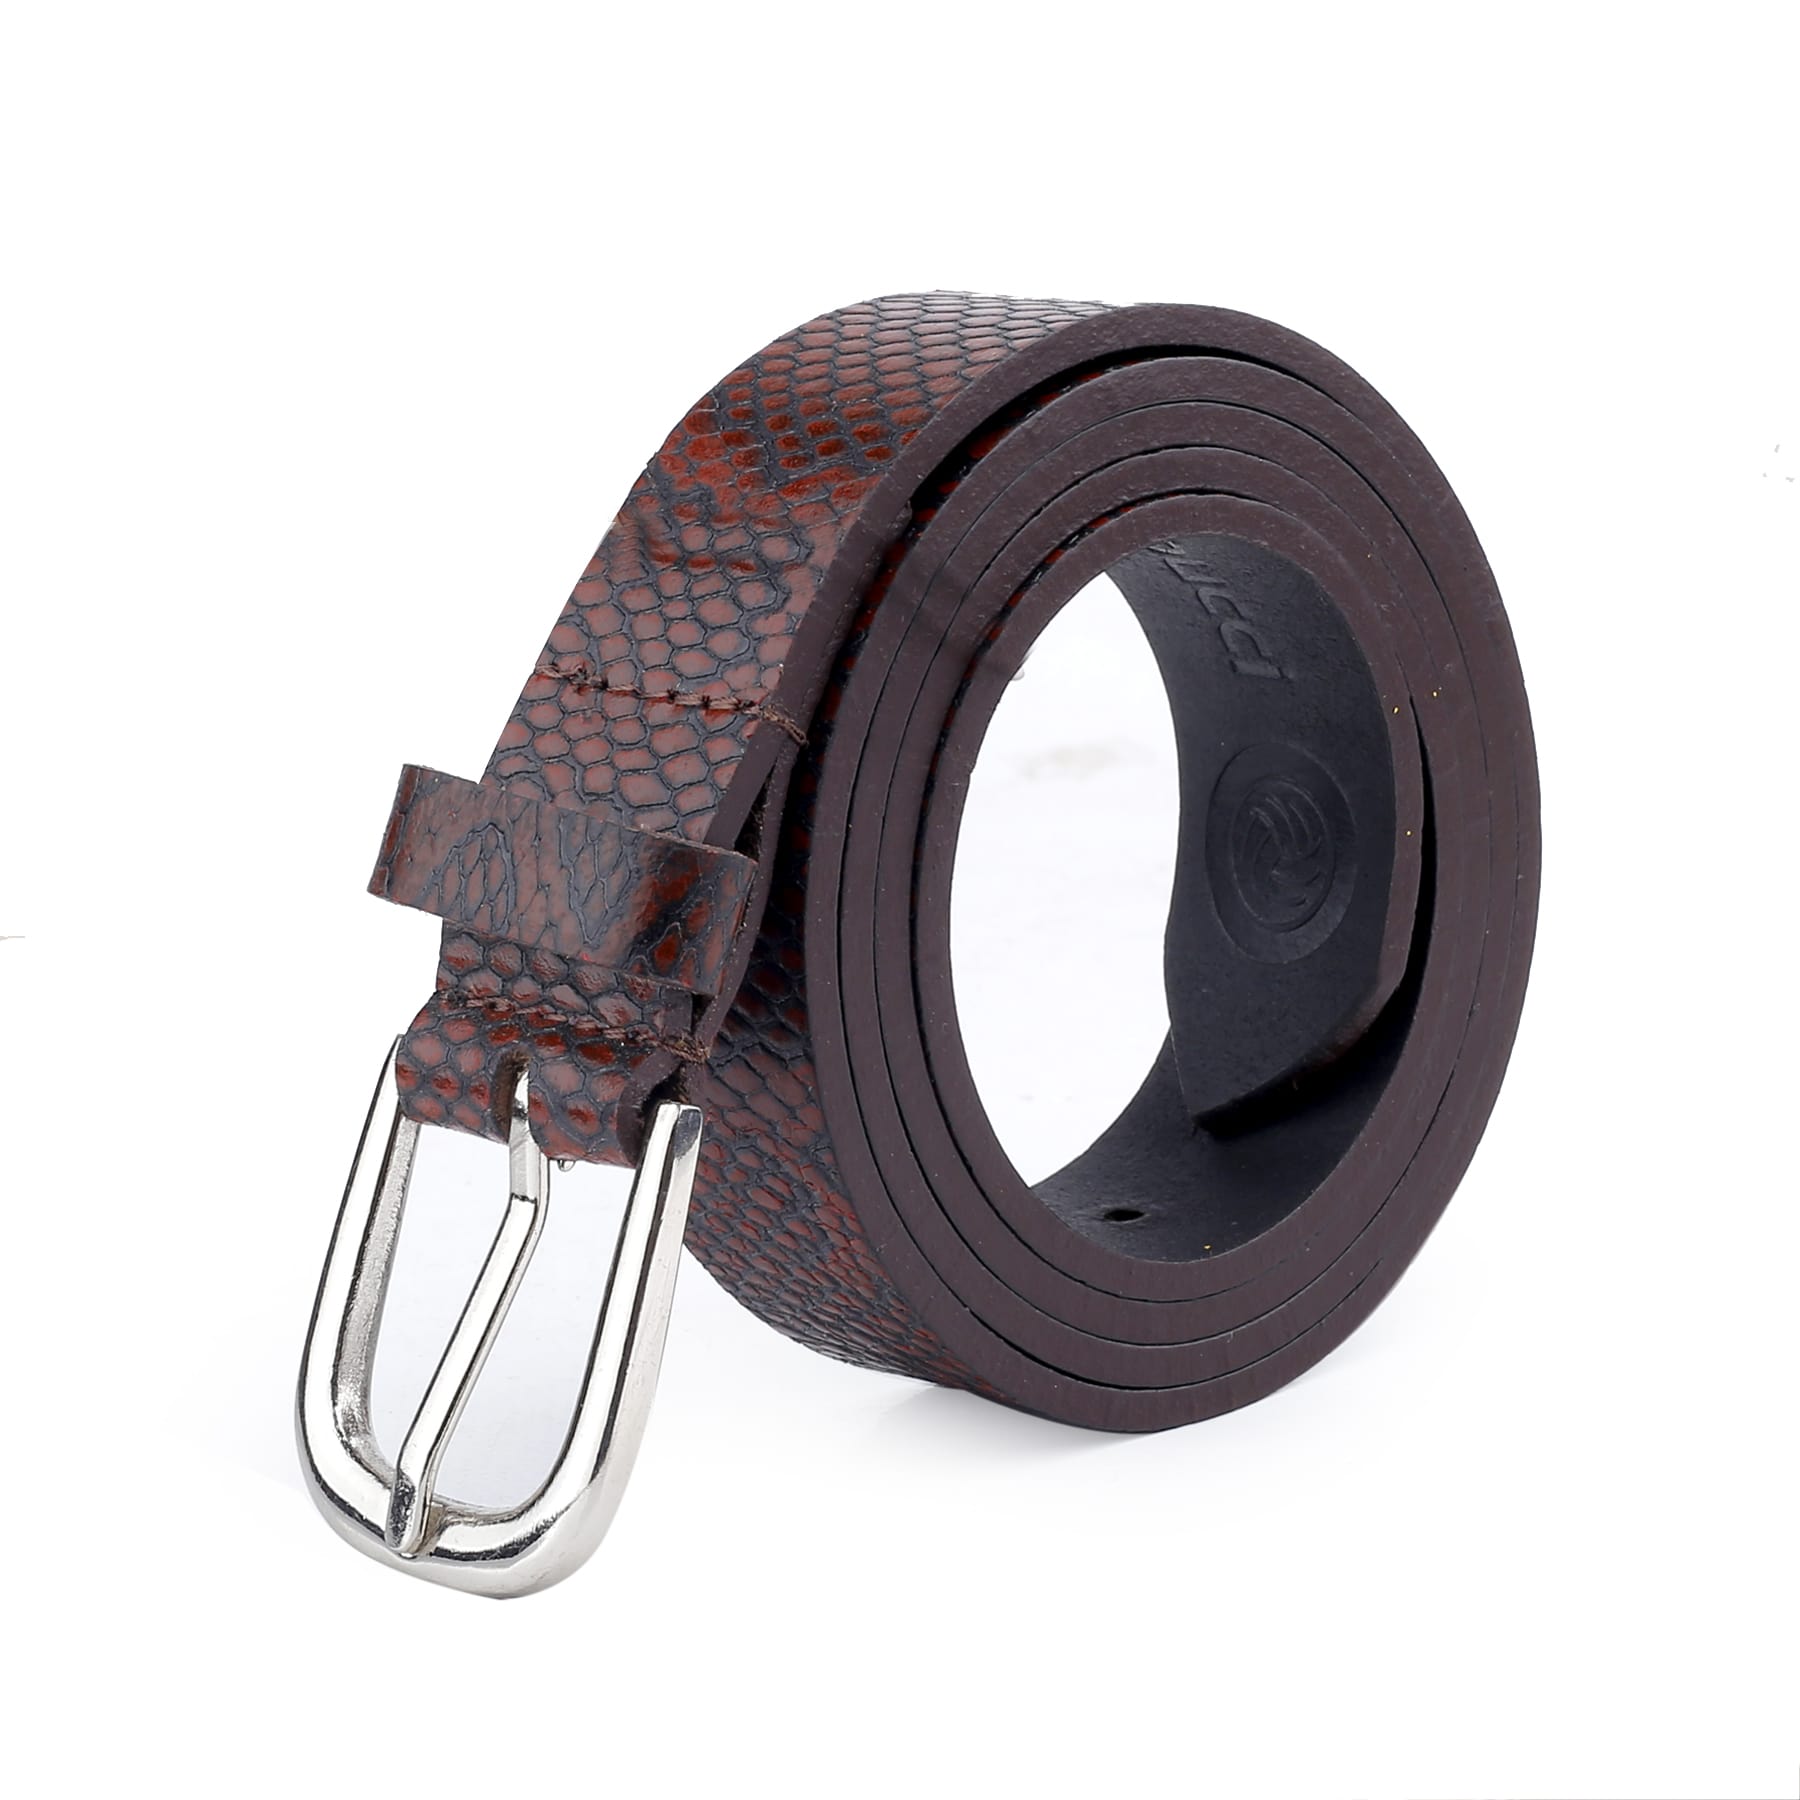 Bacca Bucci Women Genuine Leather Belts with Imported Nickle Free Buck